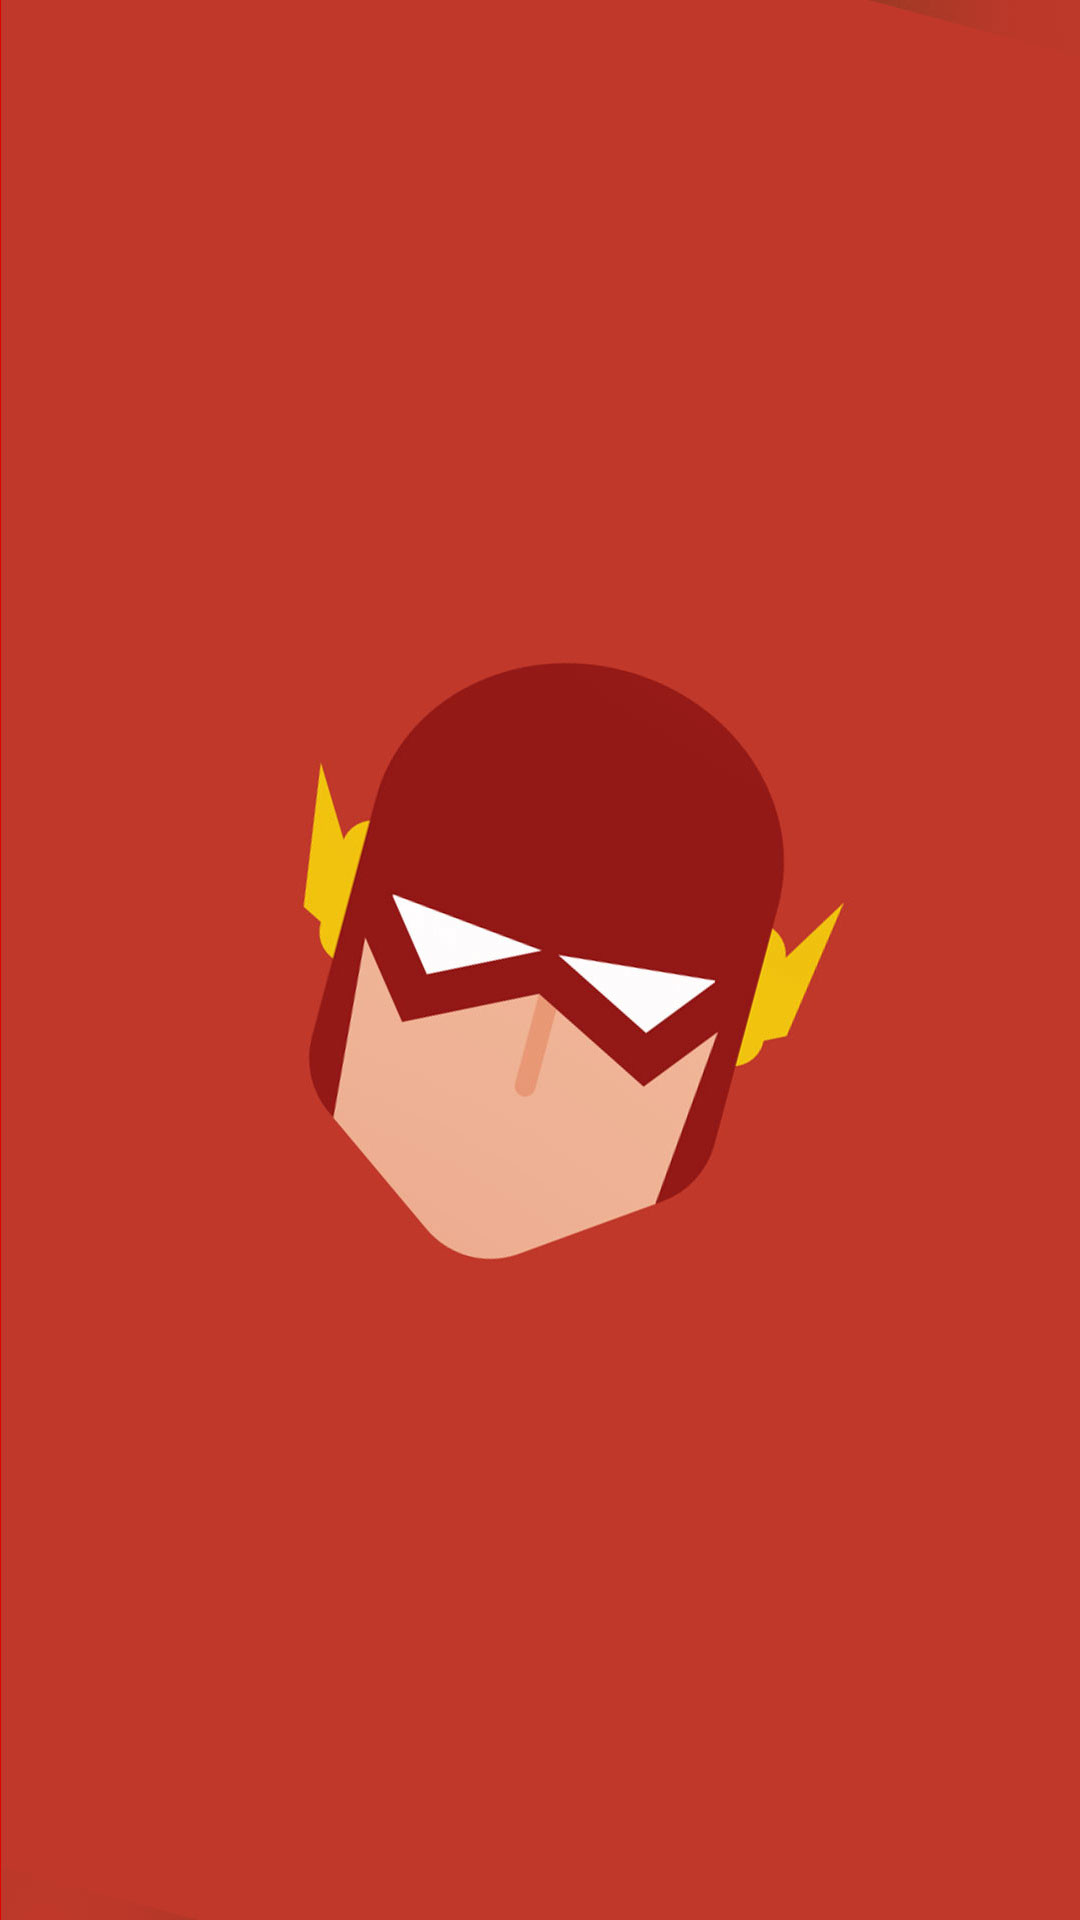 The Flash Symbol Wallpaper For Android - Wall For Android